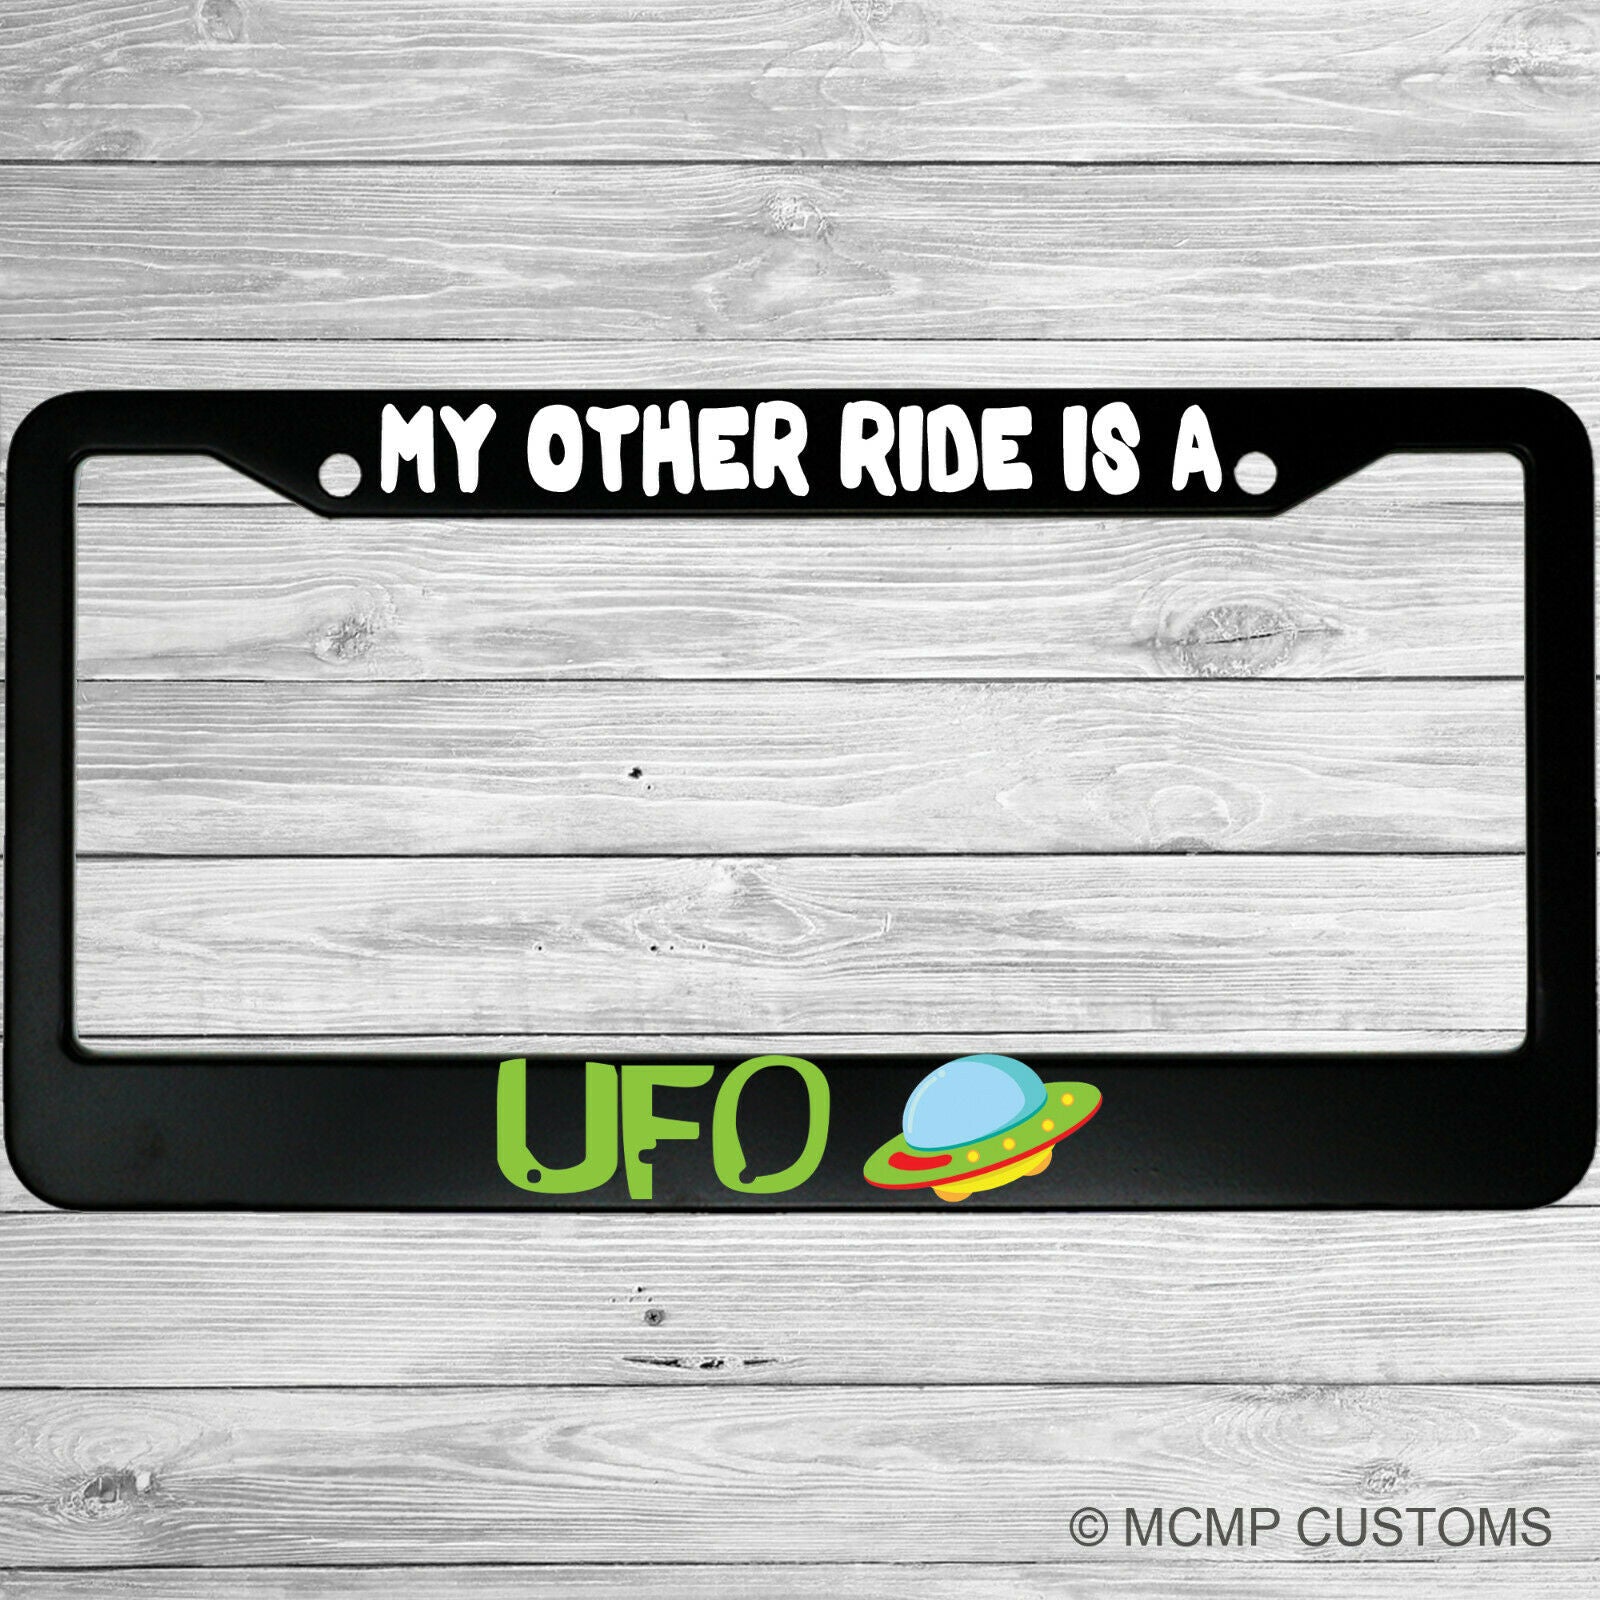 My Other Ride Is A UFO